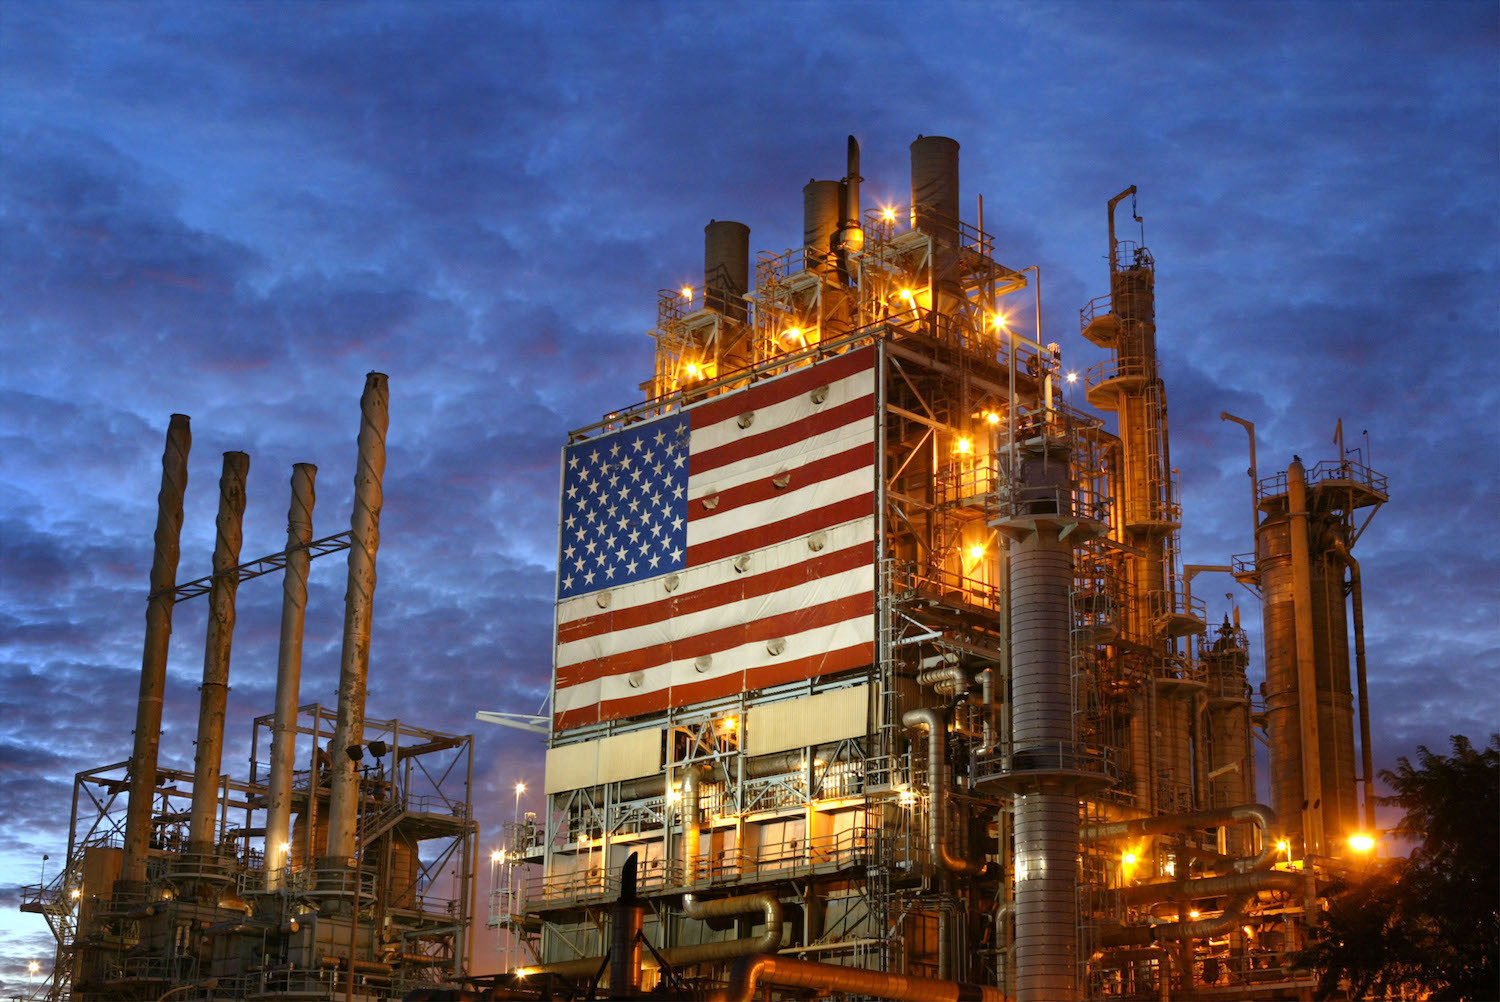 US Crude oil inventories see unexpected rebound